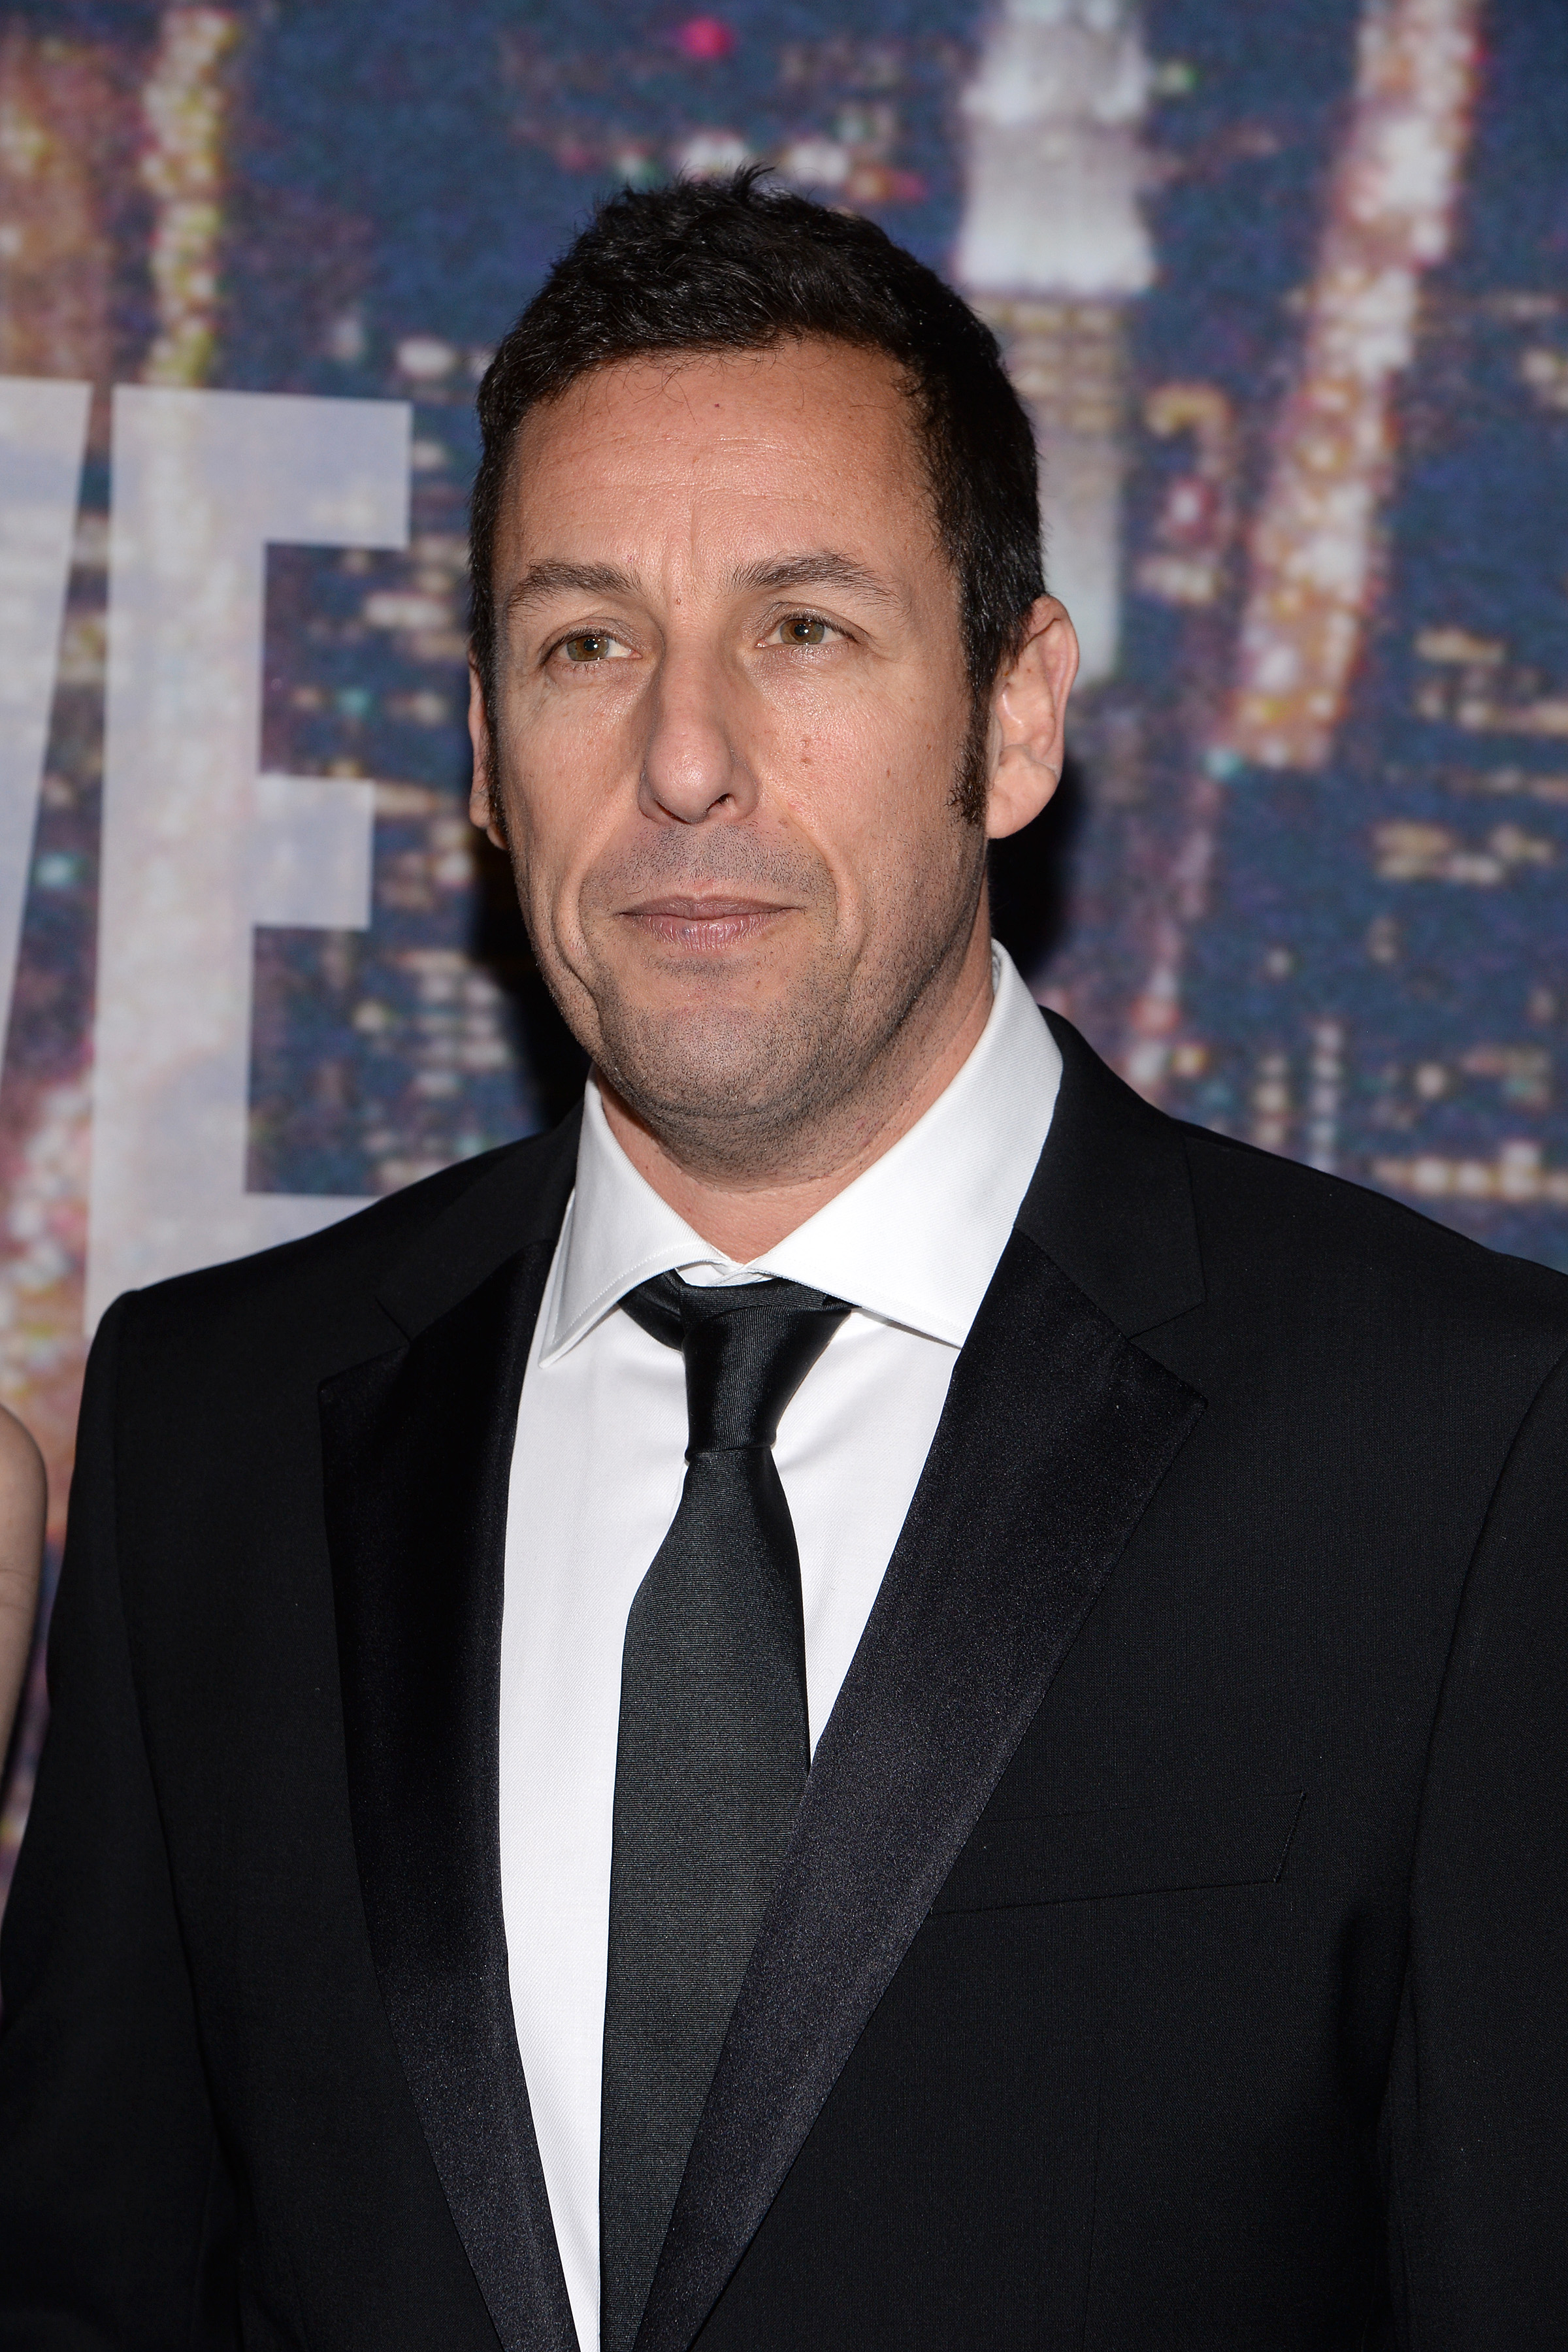 Actor Adam Sandler attends the SNL 40th Anniversary Special at 30 Rockefeller Plaza in New York, NY, on February 15, 2015. (Photo by Anthony Behar) *** Please Use Credit from Credit Field *** (Behar Anthony—SIPA USA)